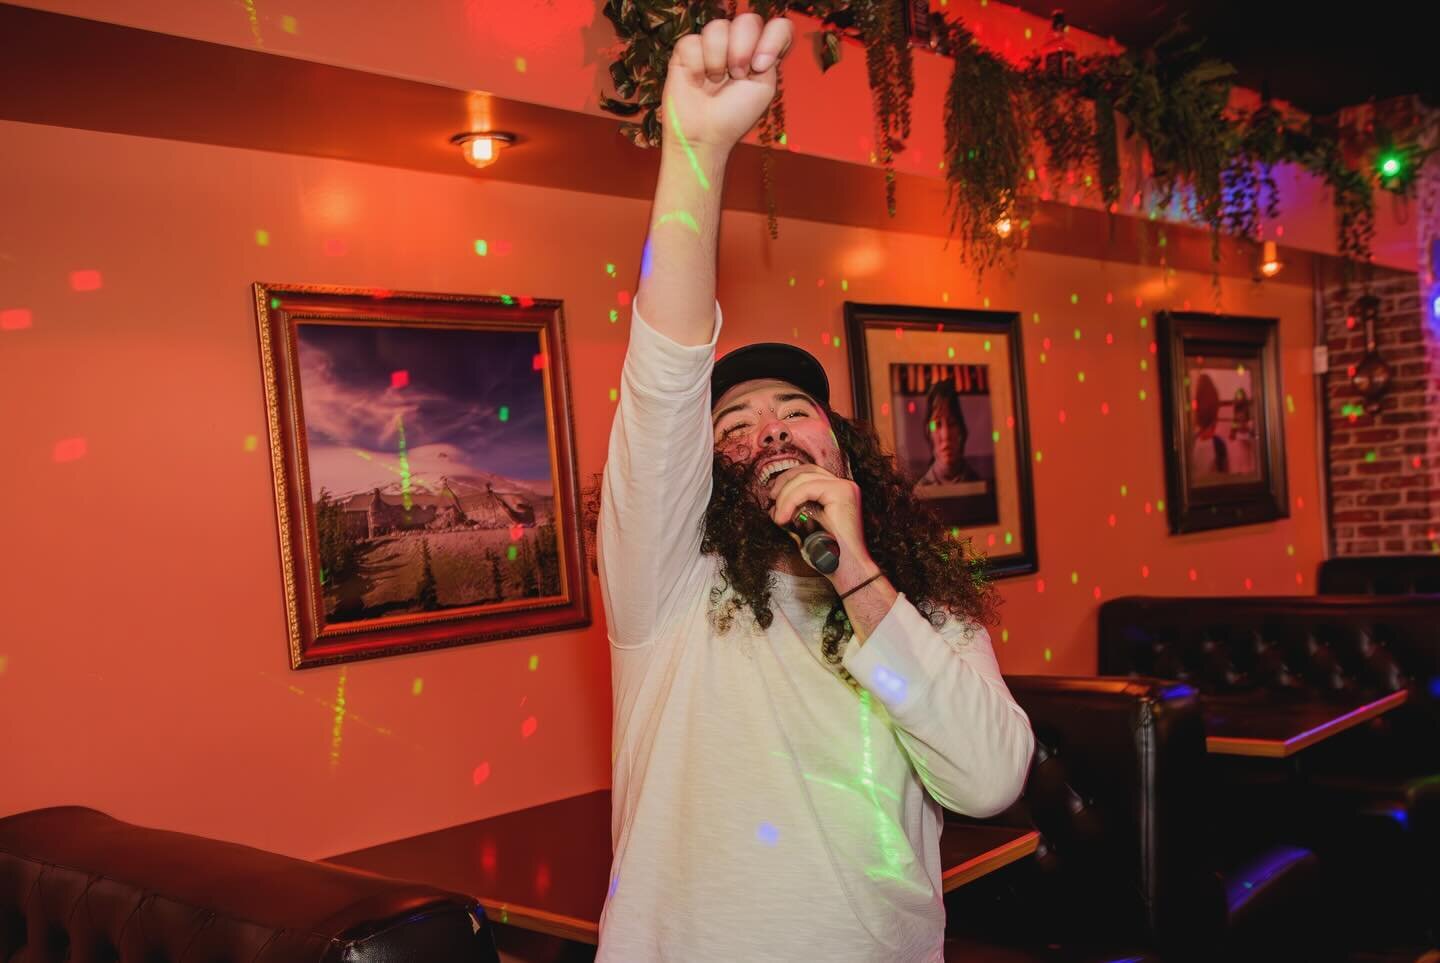 Eventually, we&rsquo;re all good singers🍻🎤 Sing your heart out at #HallwayPDX 🎶🪩 Order a Wendy&rsquo;s Revenge and grab a mic! You&rsquo;ll want to stay here with us forever and ever and ever🪓 Open TONIGHT @ 9pm 🎉

#karaoke #karaokebar #bar #th